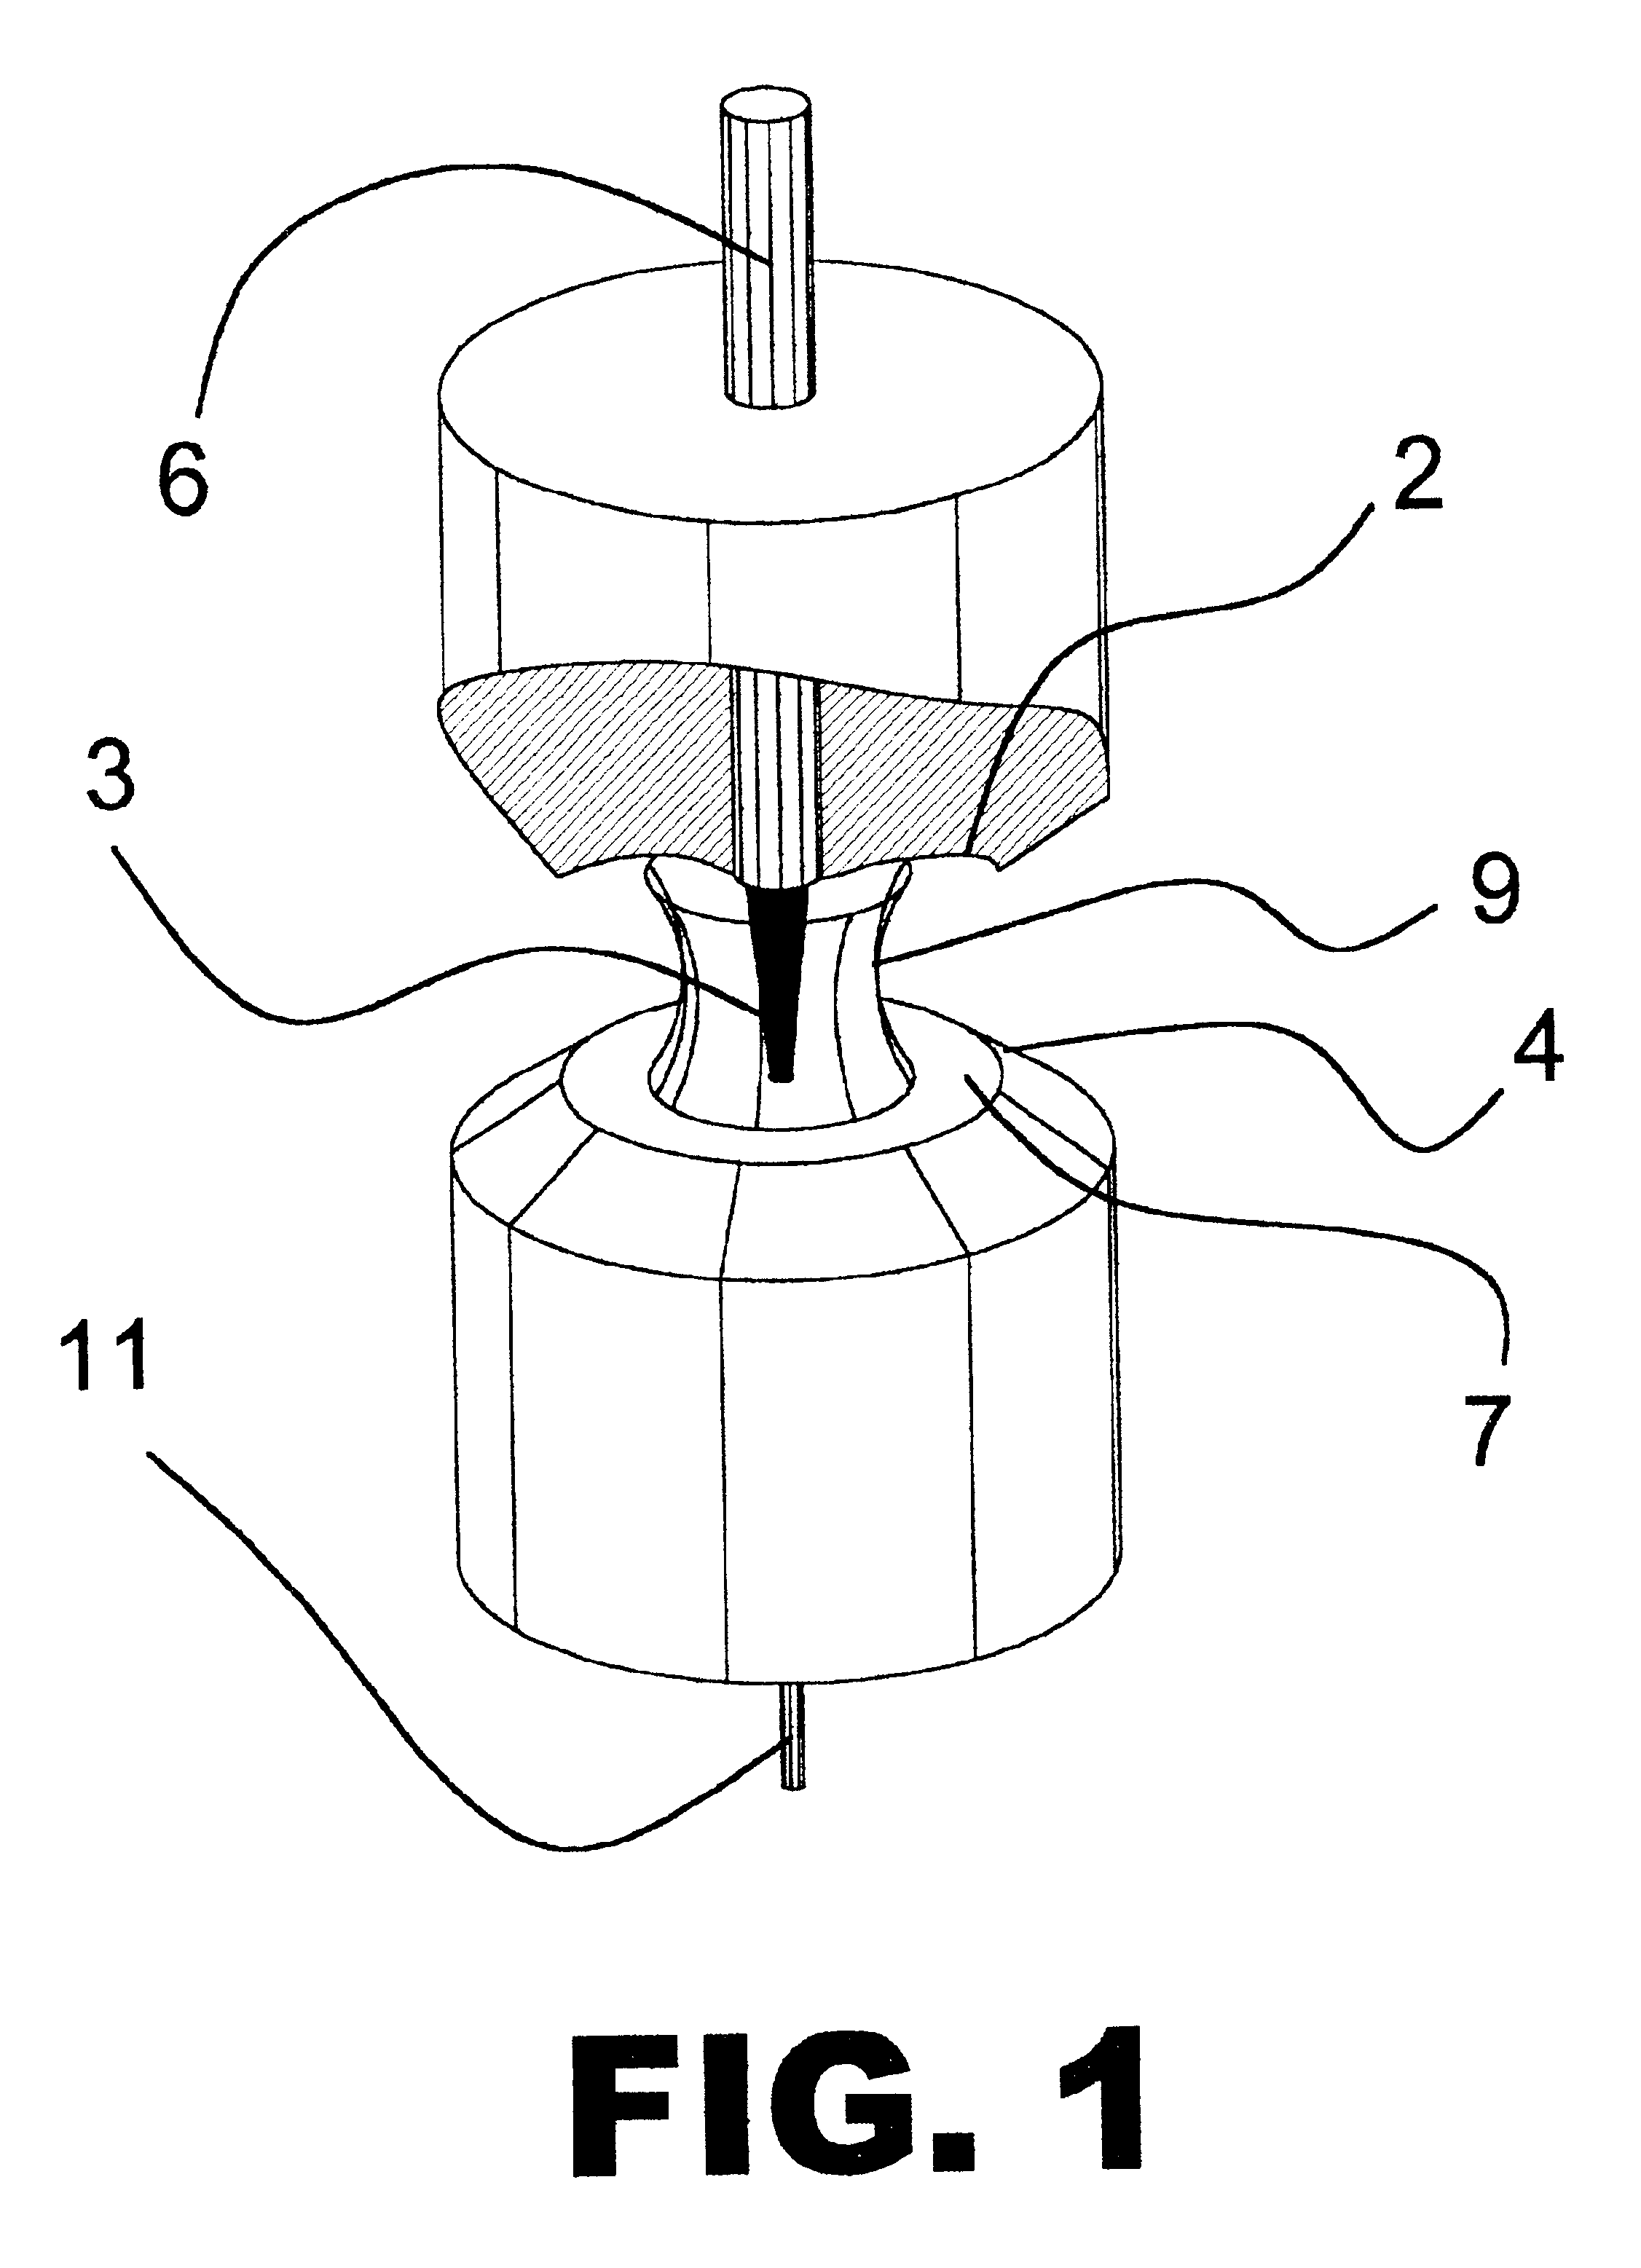 Liquid photometer using surface tension to contain sample